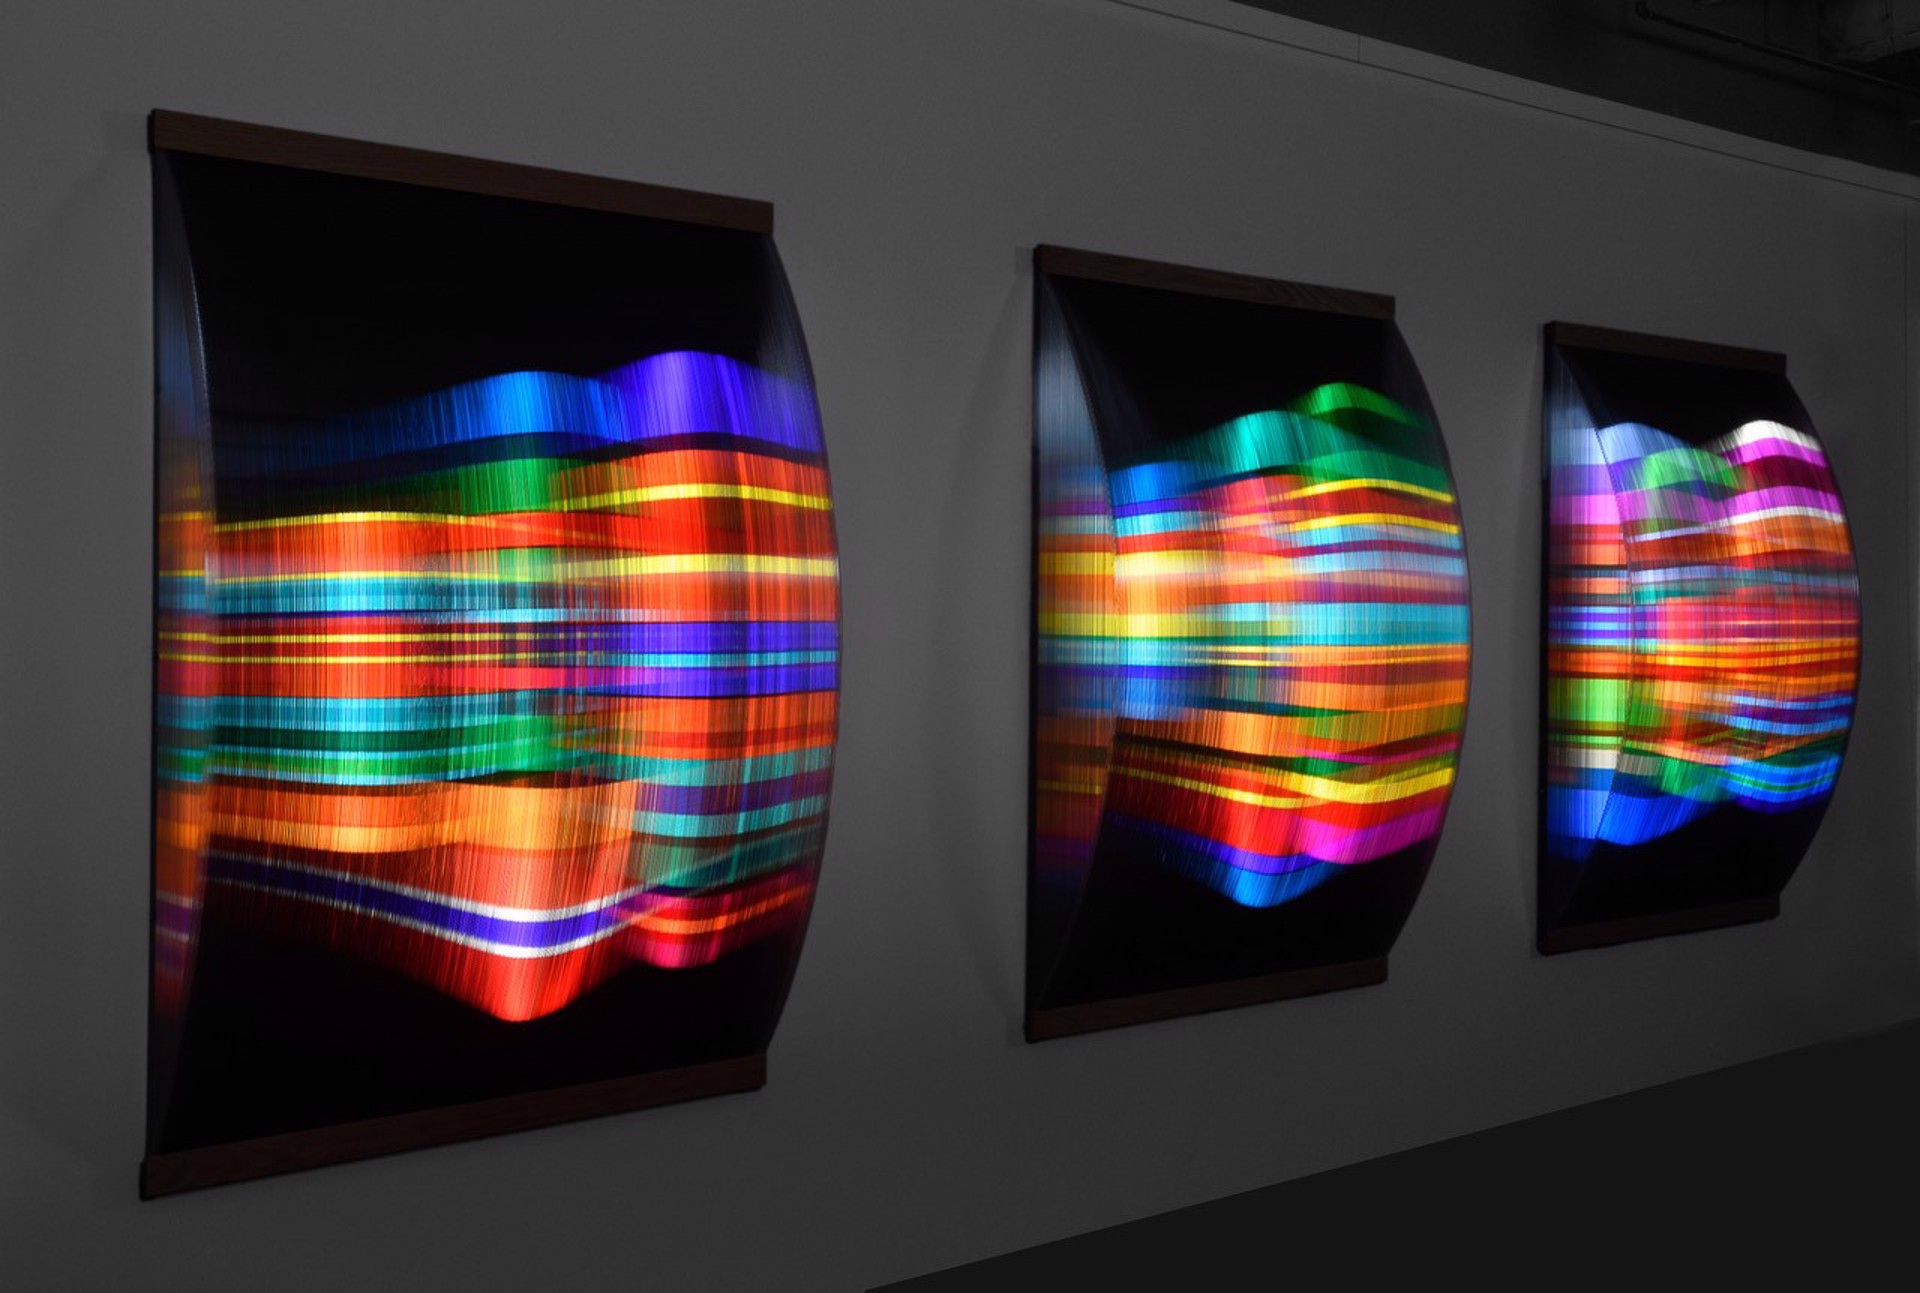 Diffraction Panel #1 by Martin Cail